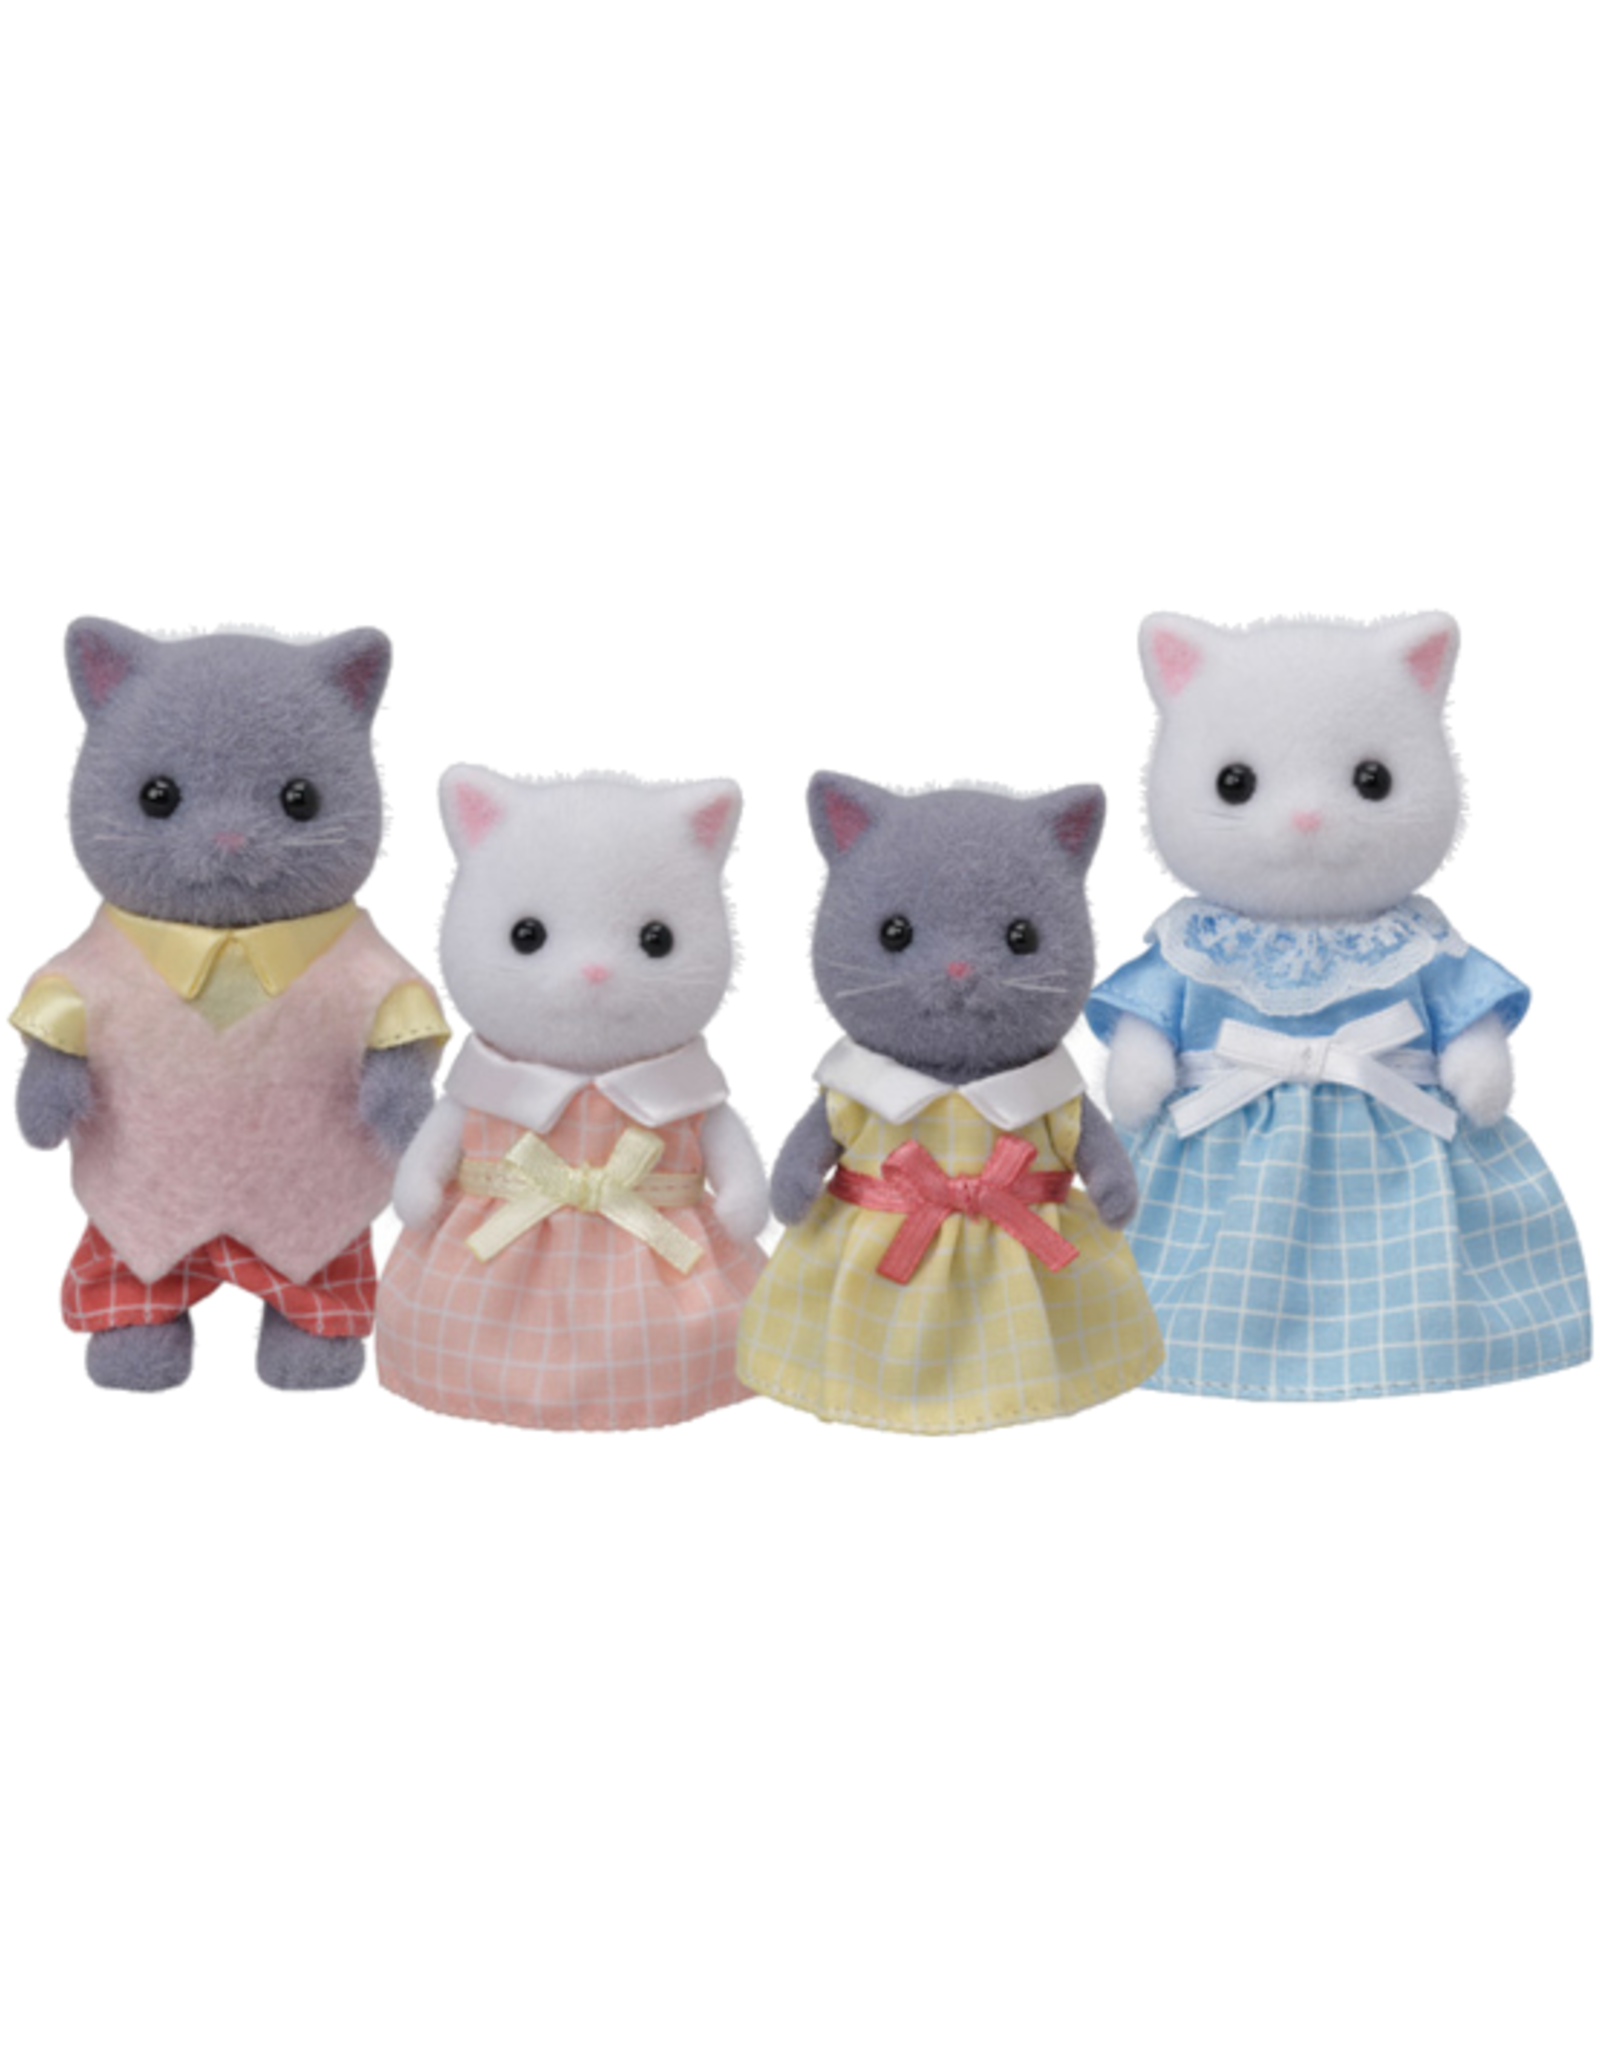 Calico Critters Calico Critters - Persian Cat Family (White\Grey)